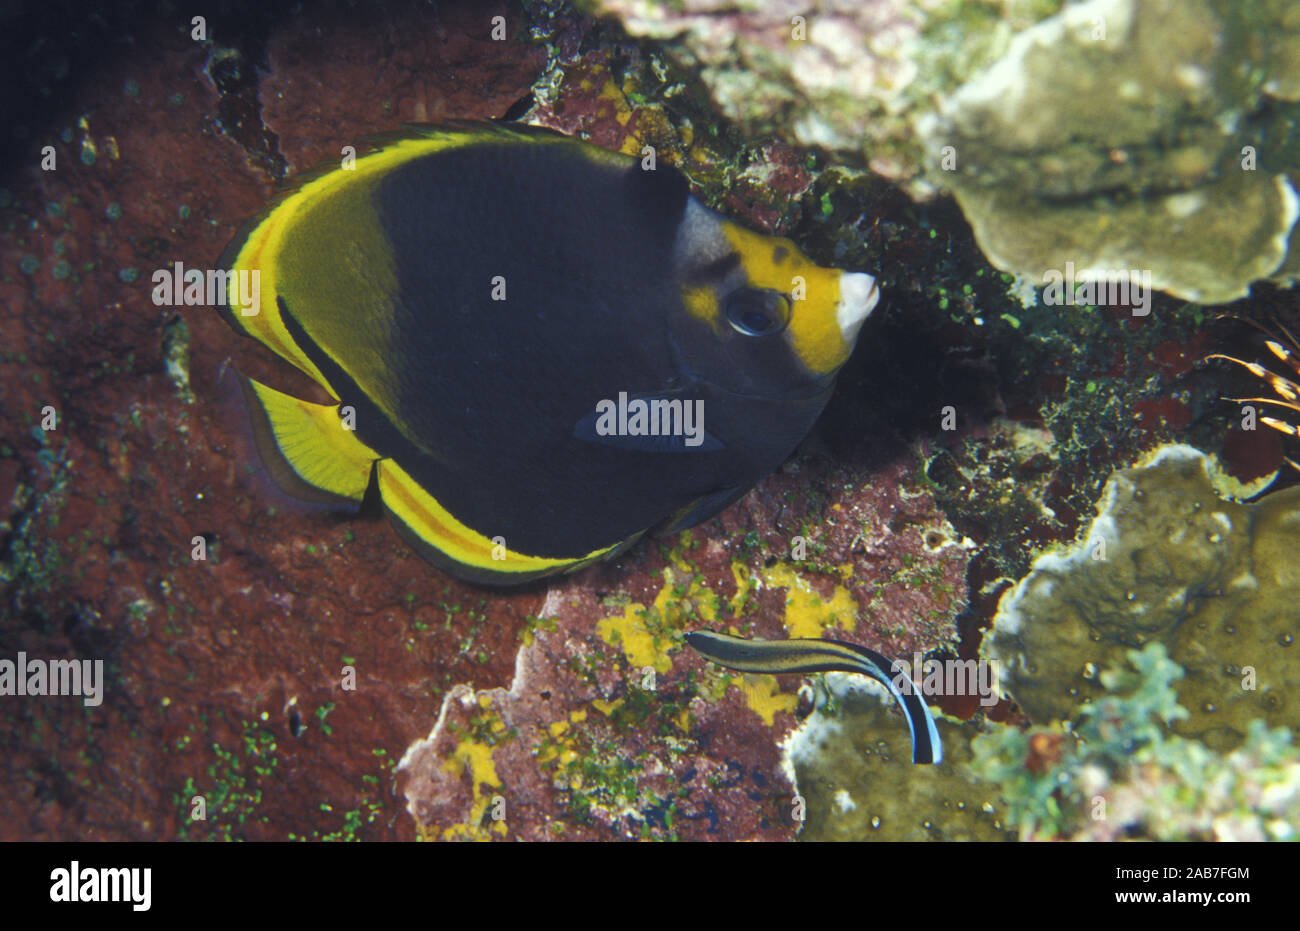 Black butterflyfish (Chaetodon flavirostris), hides in a coral crevice while Cleaner wrasse (Labroides dimidiatus) feeds on skin parasites. Lady Ellio Stock Photo